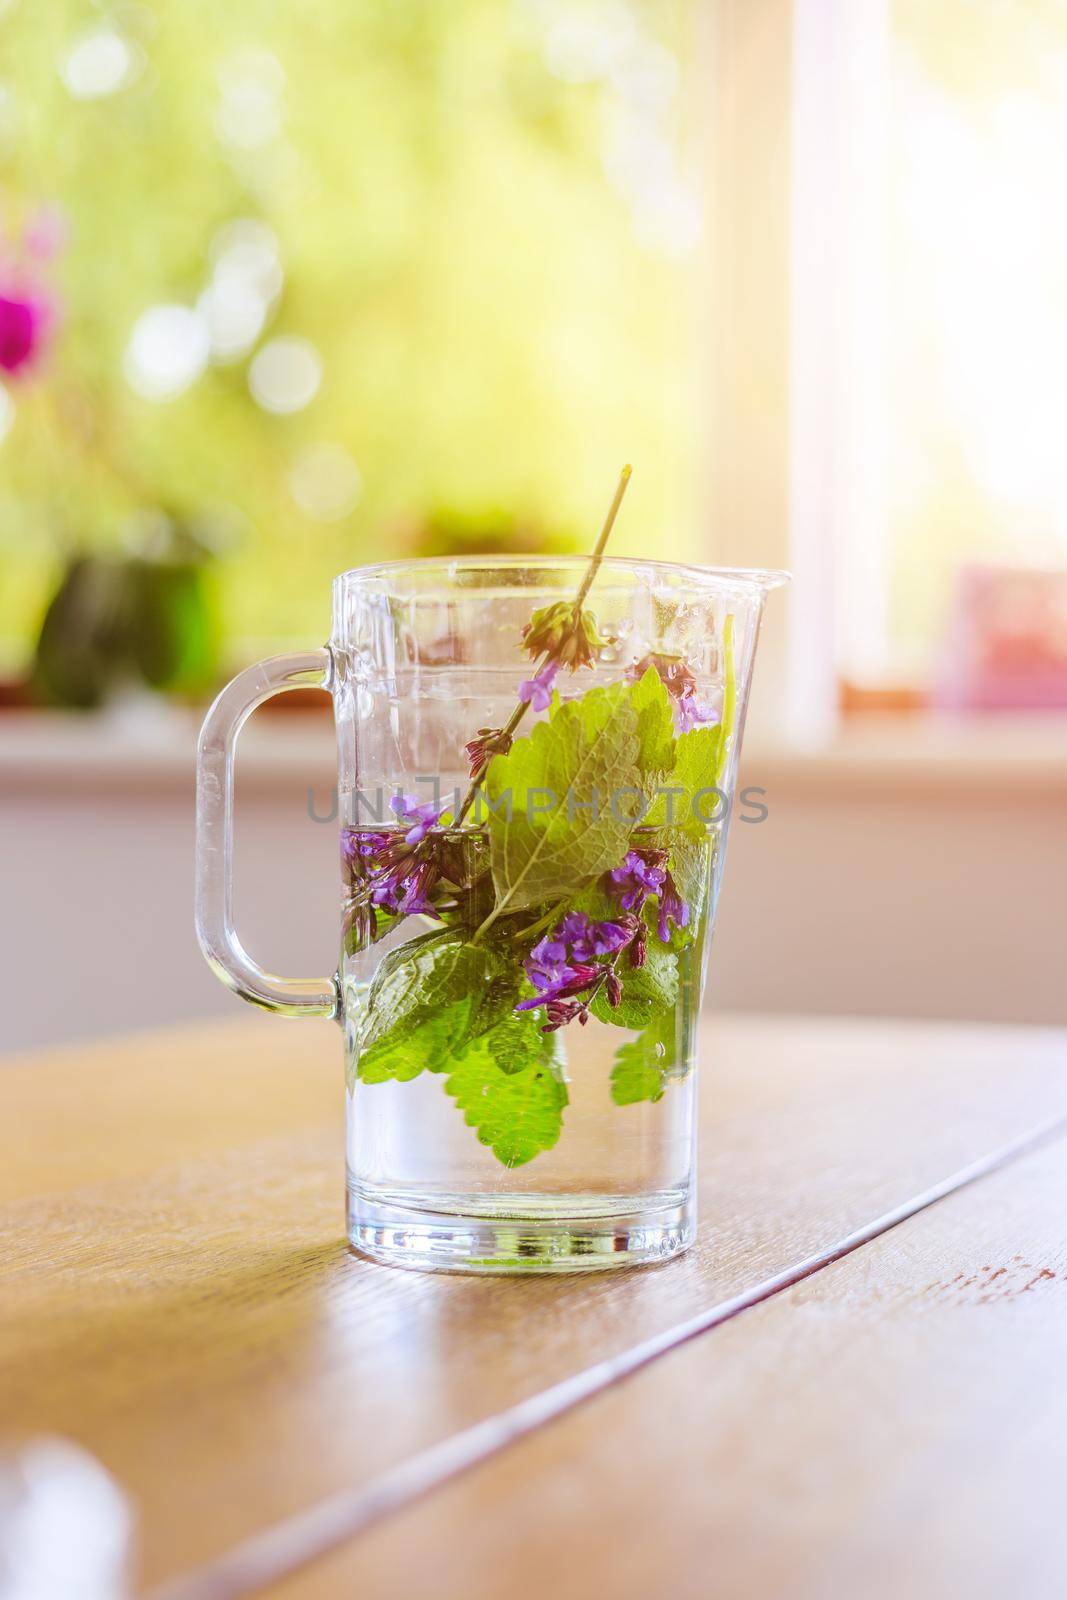 Cold refreshing water jar in summer: Tasty lemonade with herbs, multi colored by Daxenbichler